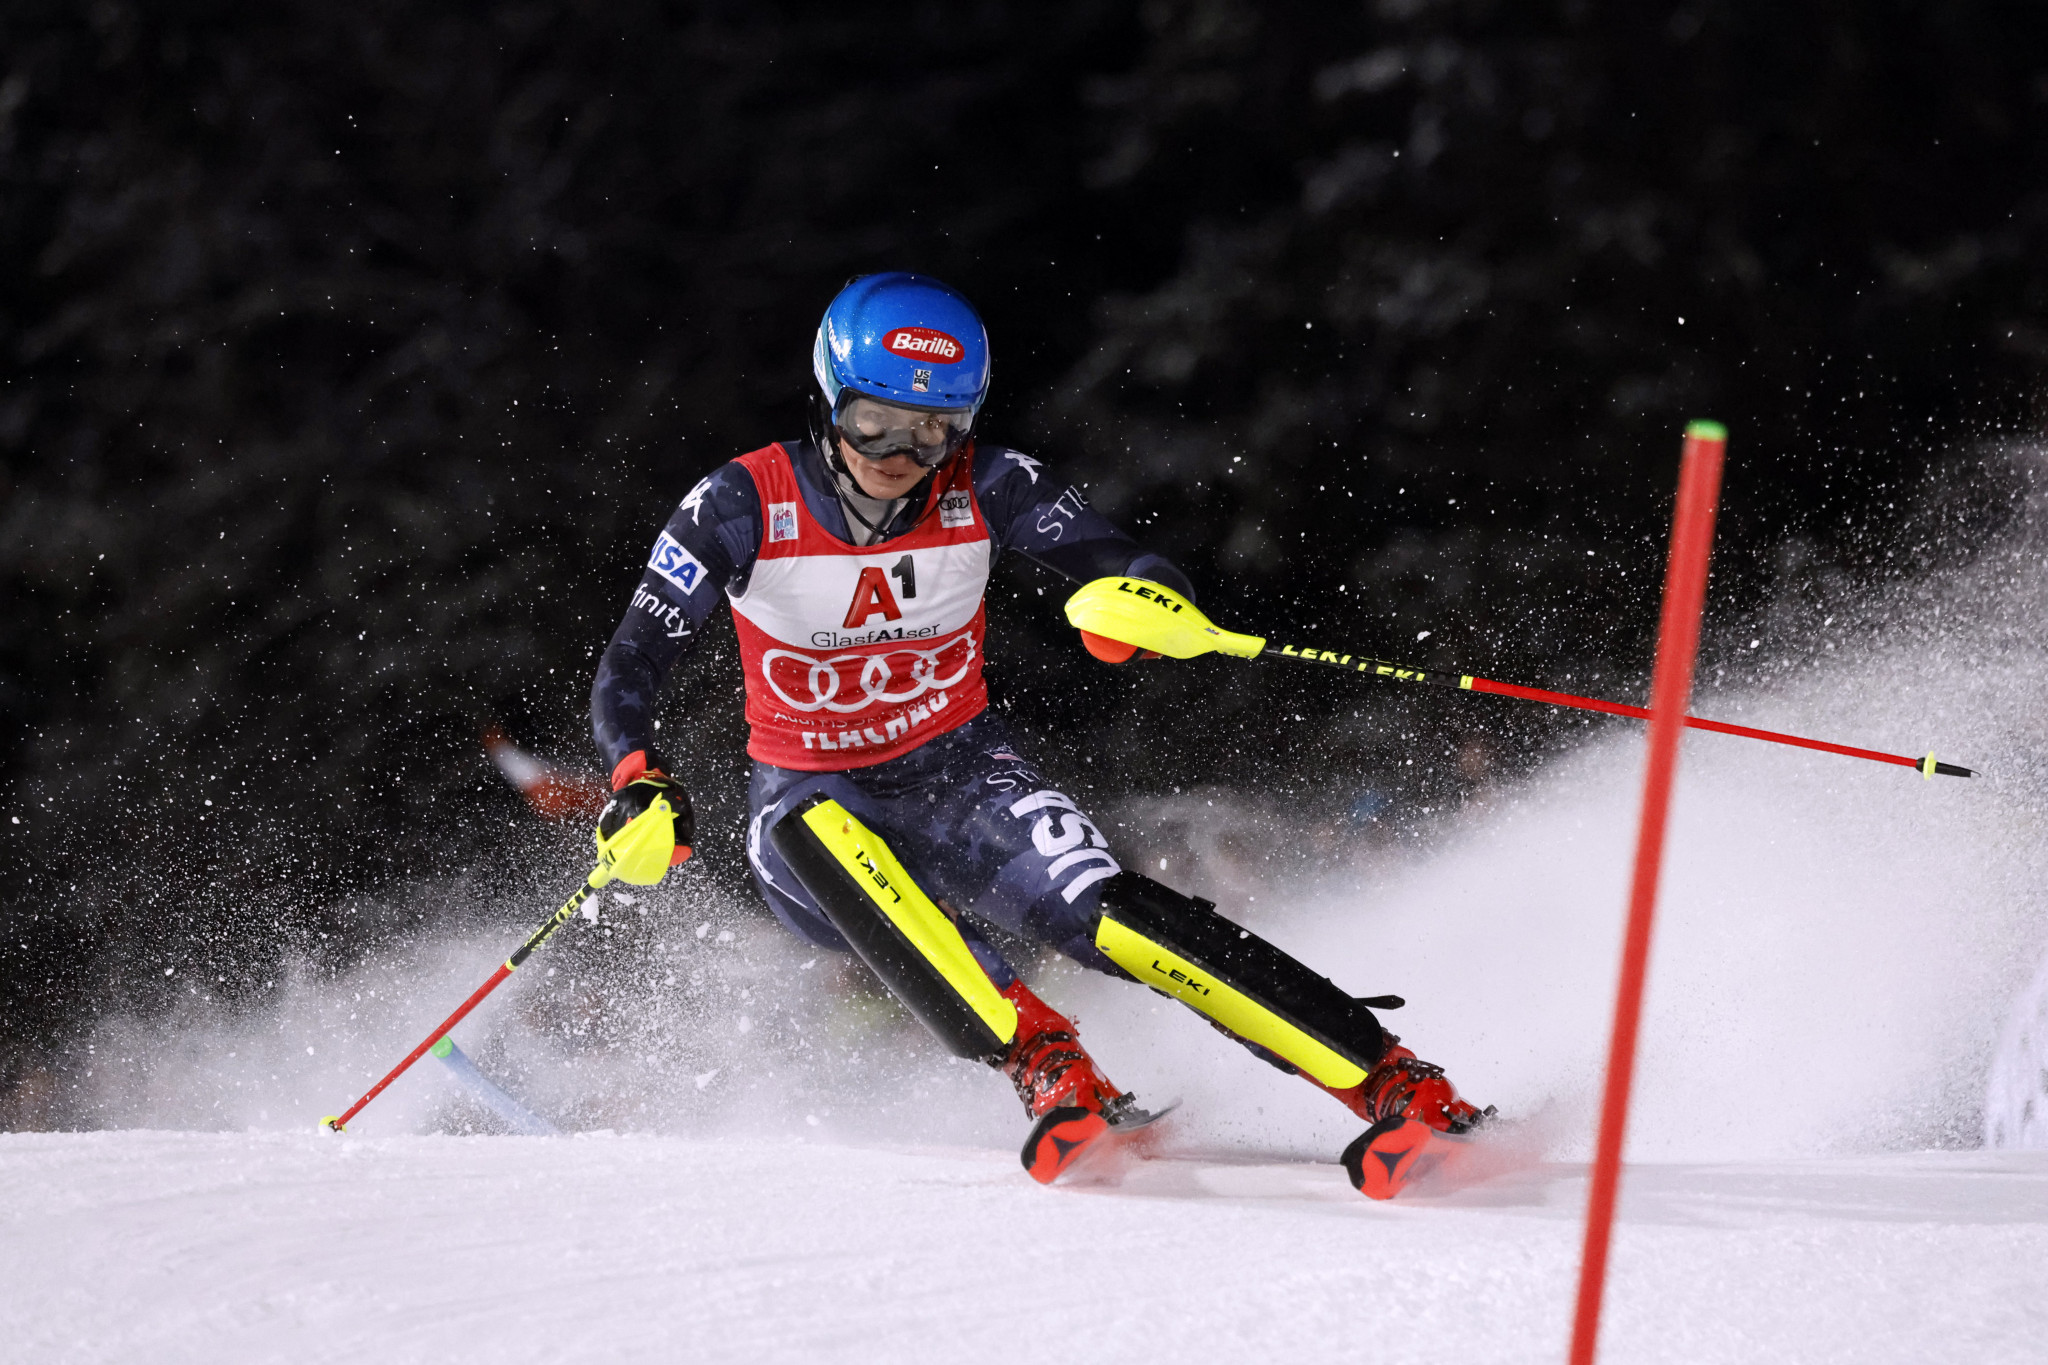 Mikaela Shiffrin will have to wait to break the FIS World Cup record for most wins by a woman ©Getty Images